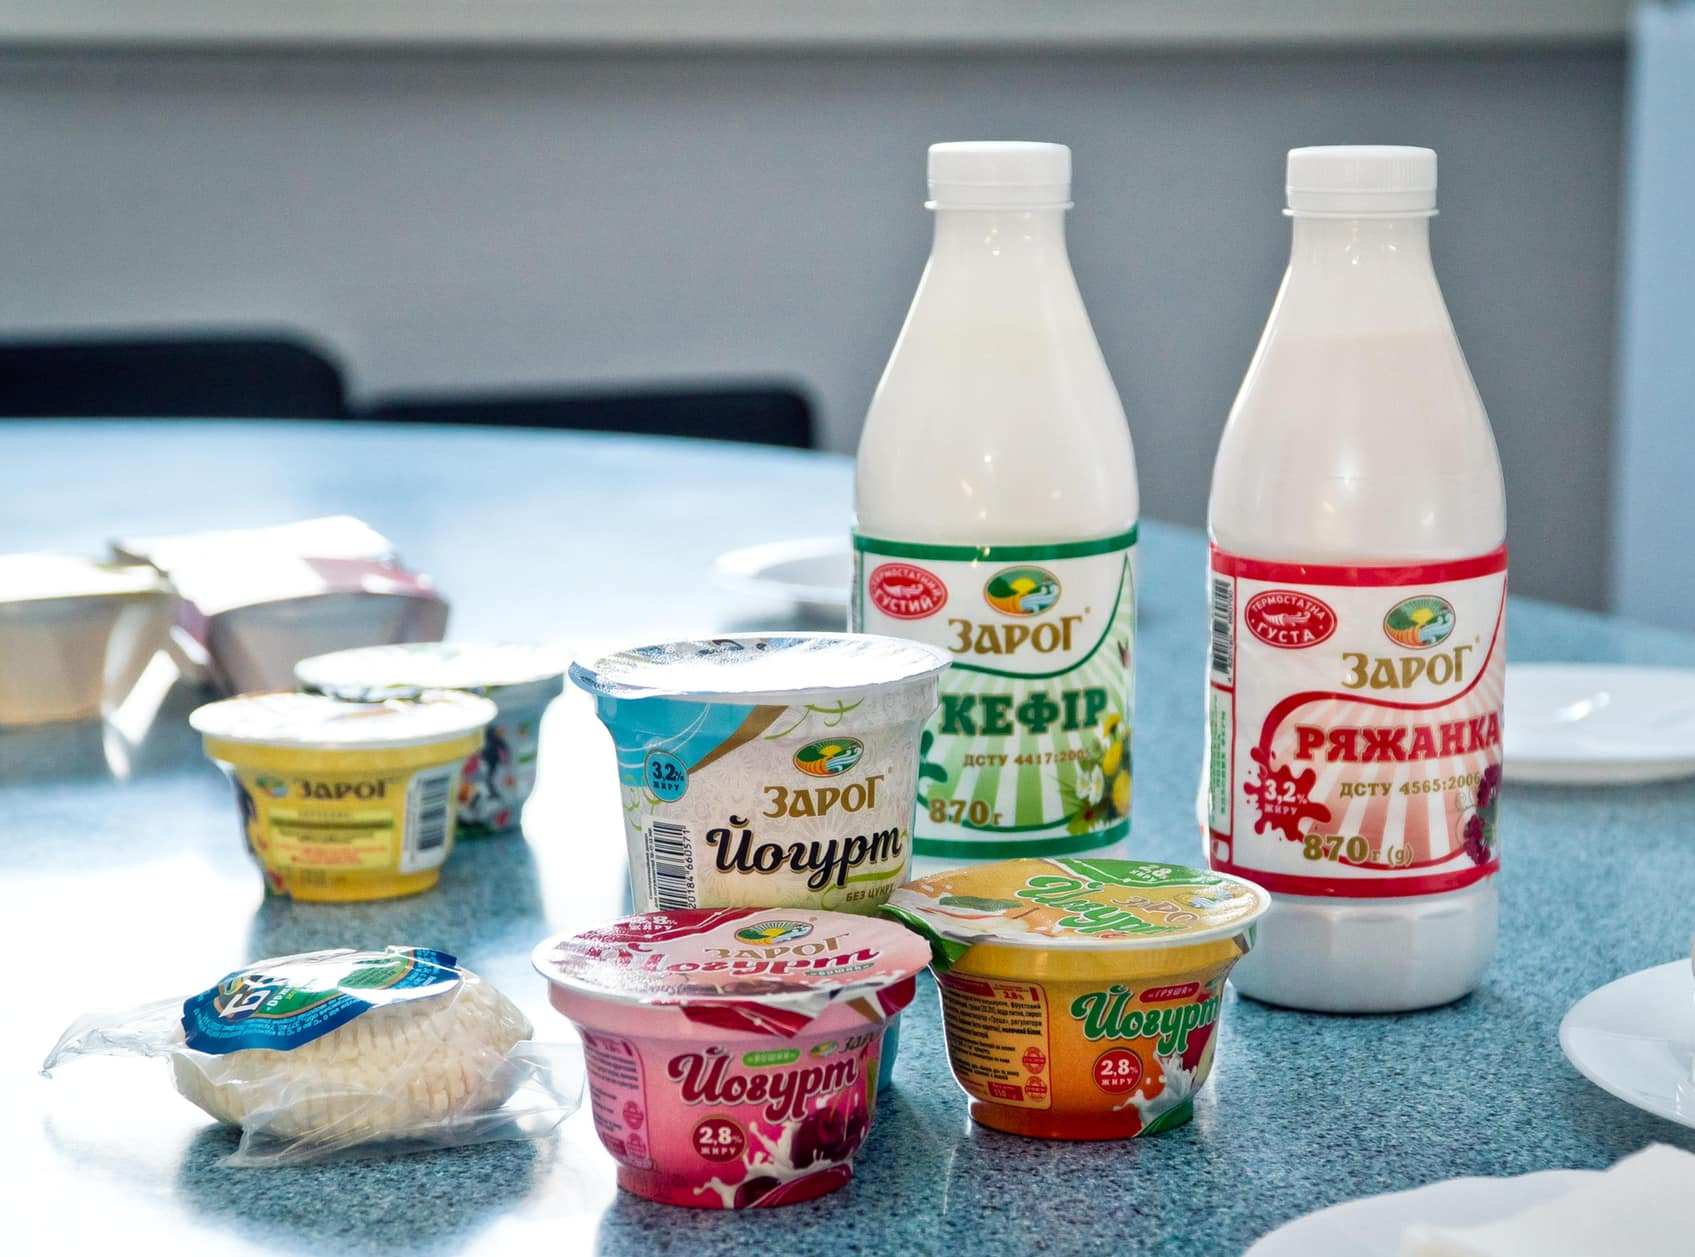 Products of the Orzhytsia Dairy Factory.